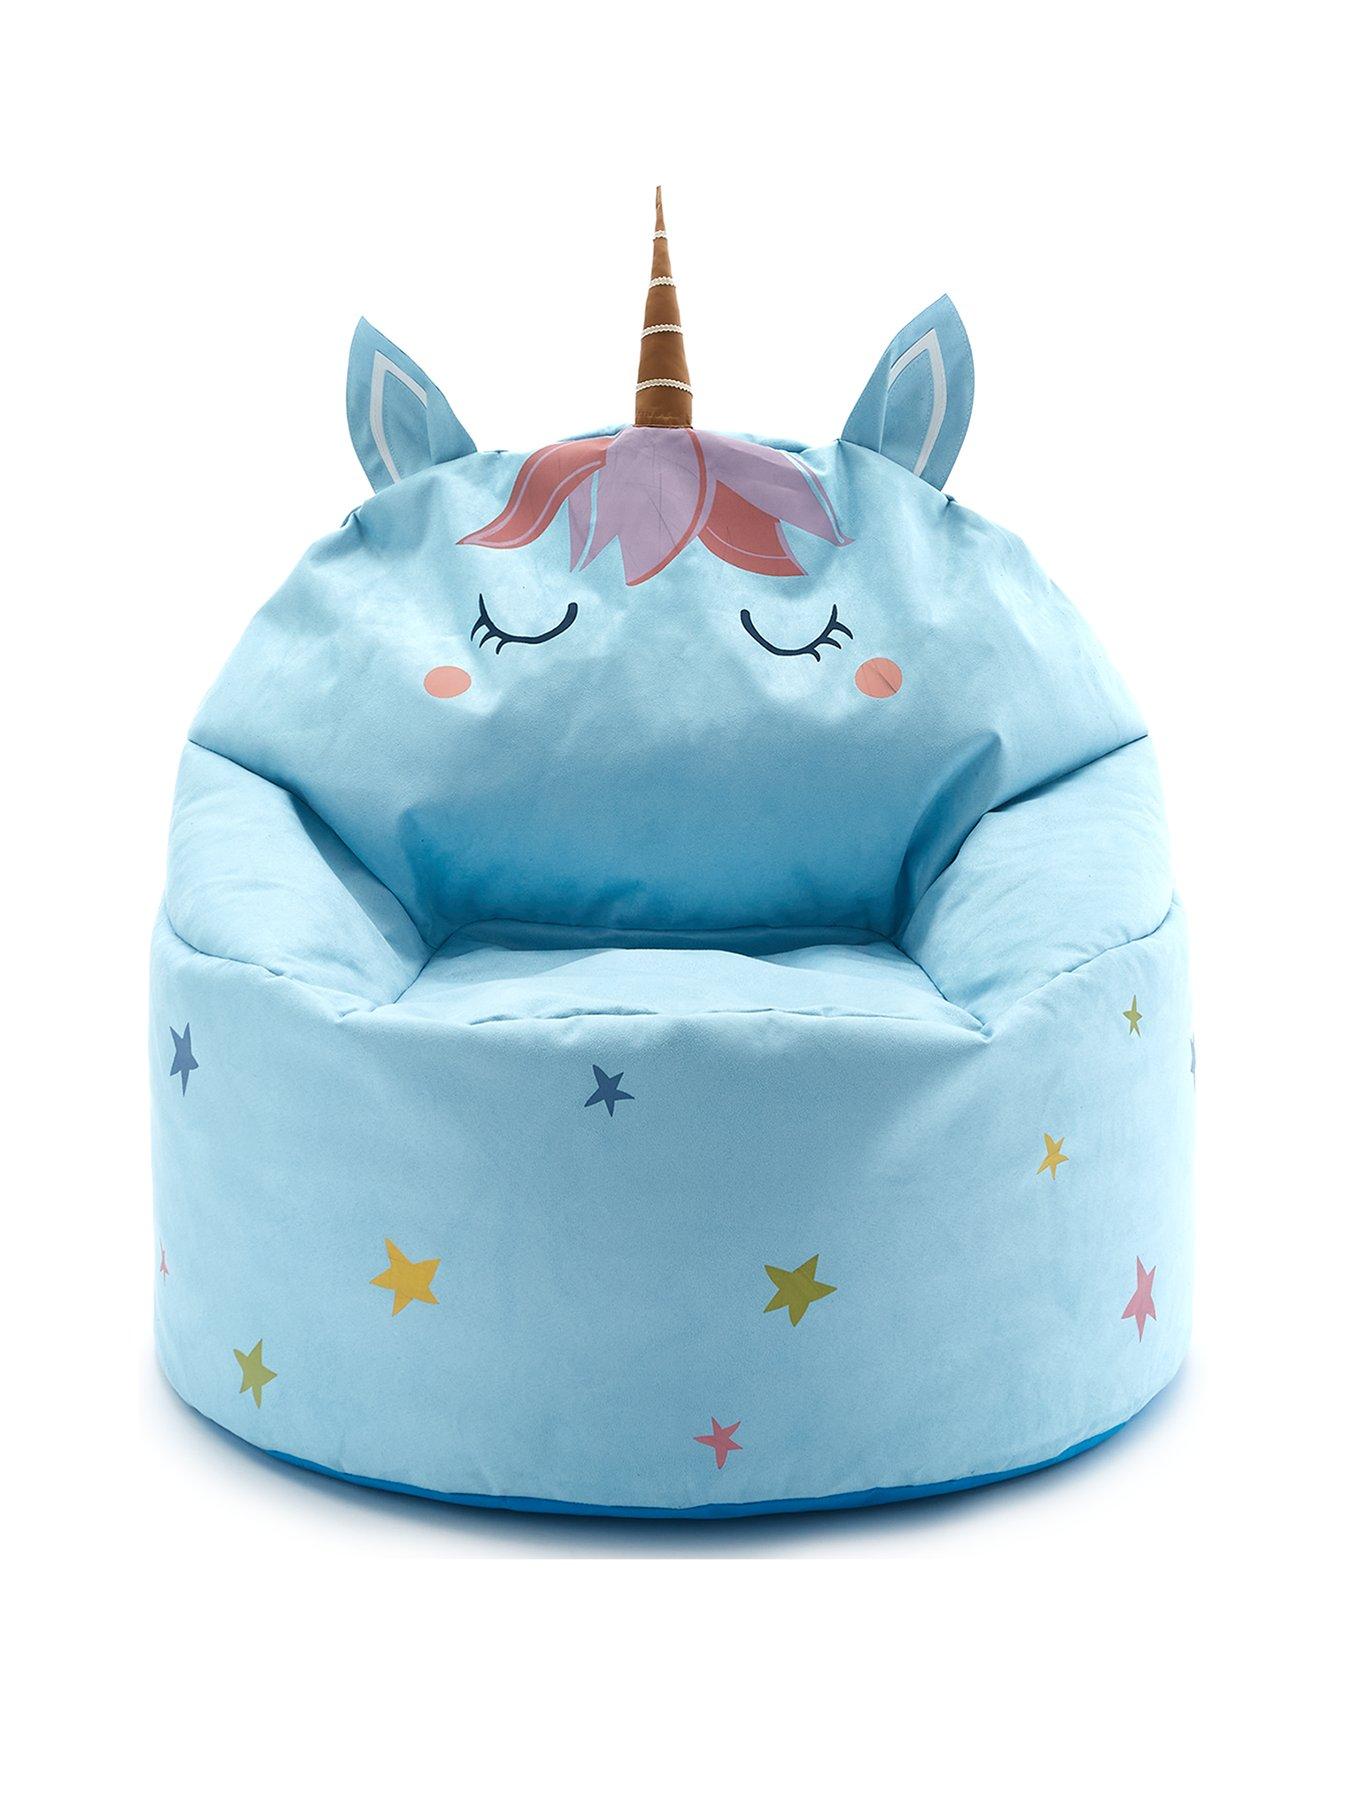  Loungie Stuffed Animal Storage Beanbag Cover - 55 Extra Large  Bean Bag Chair, Unicorn Light Pink : Home & Kitchen